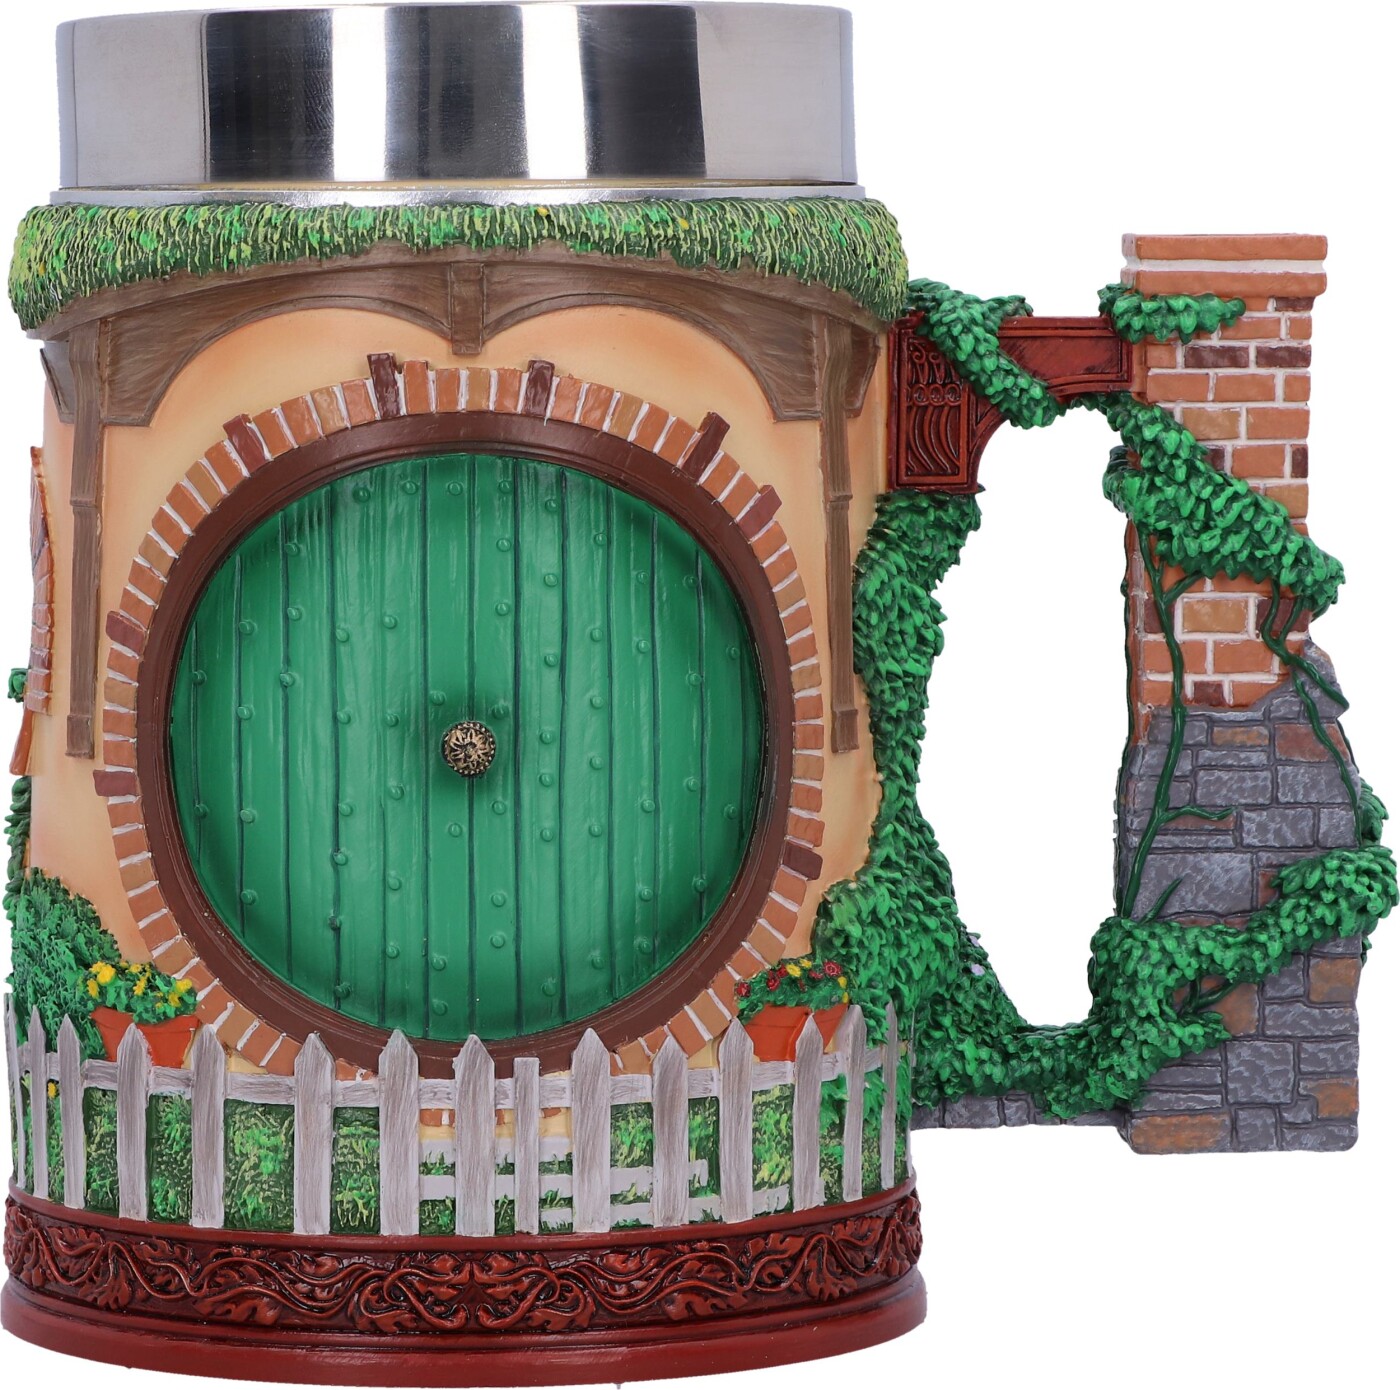 Se Lord Of The Rings The Shire Tankard hos Gucca.dk